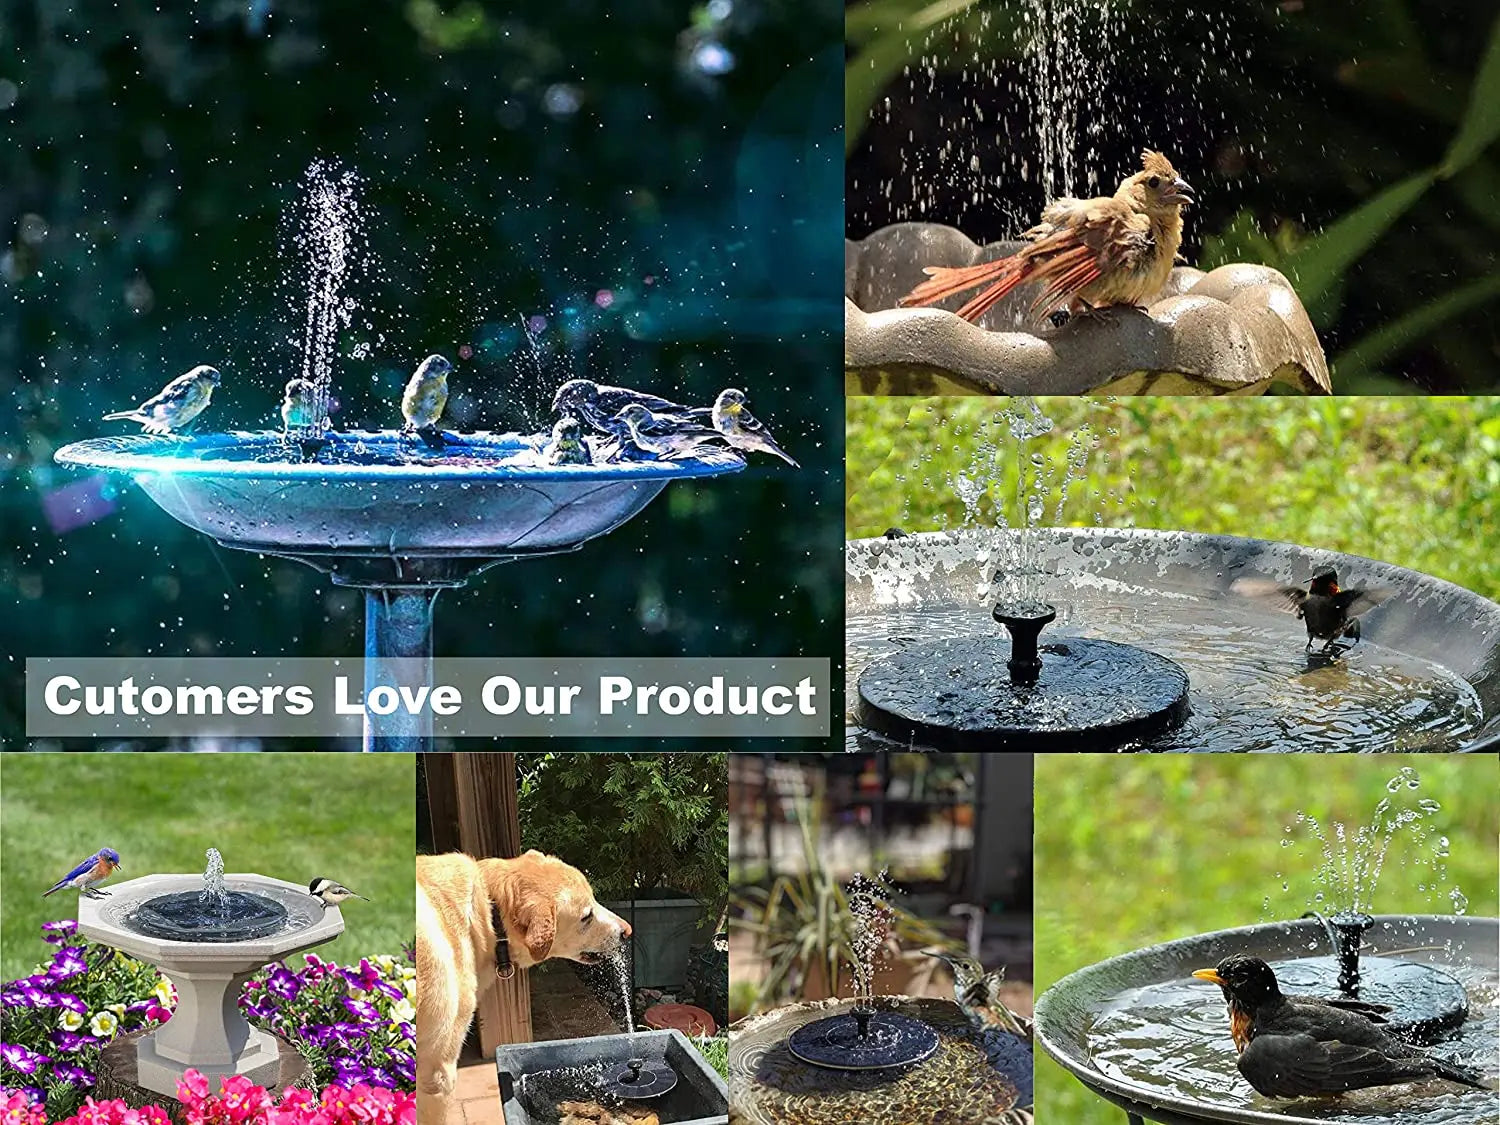 Floating Solar Fountain, Optimize Solar Powered Fountain performance by swapping nozzle heads and placing it in direct sunlight.